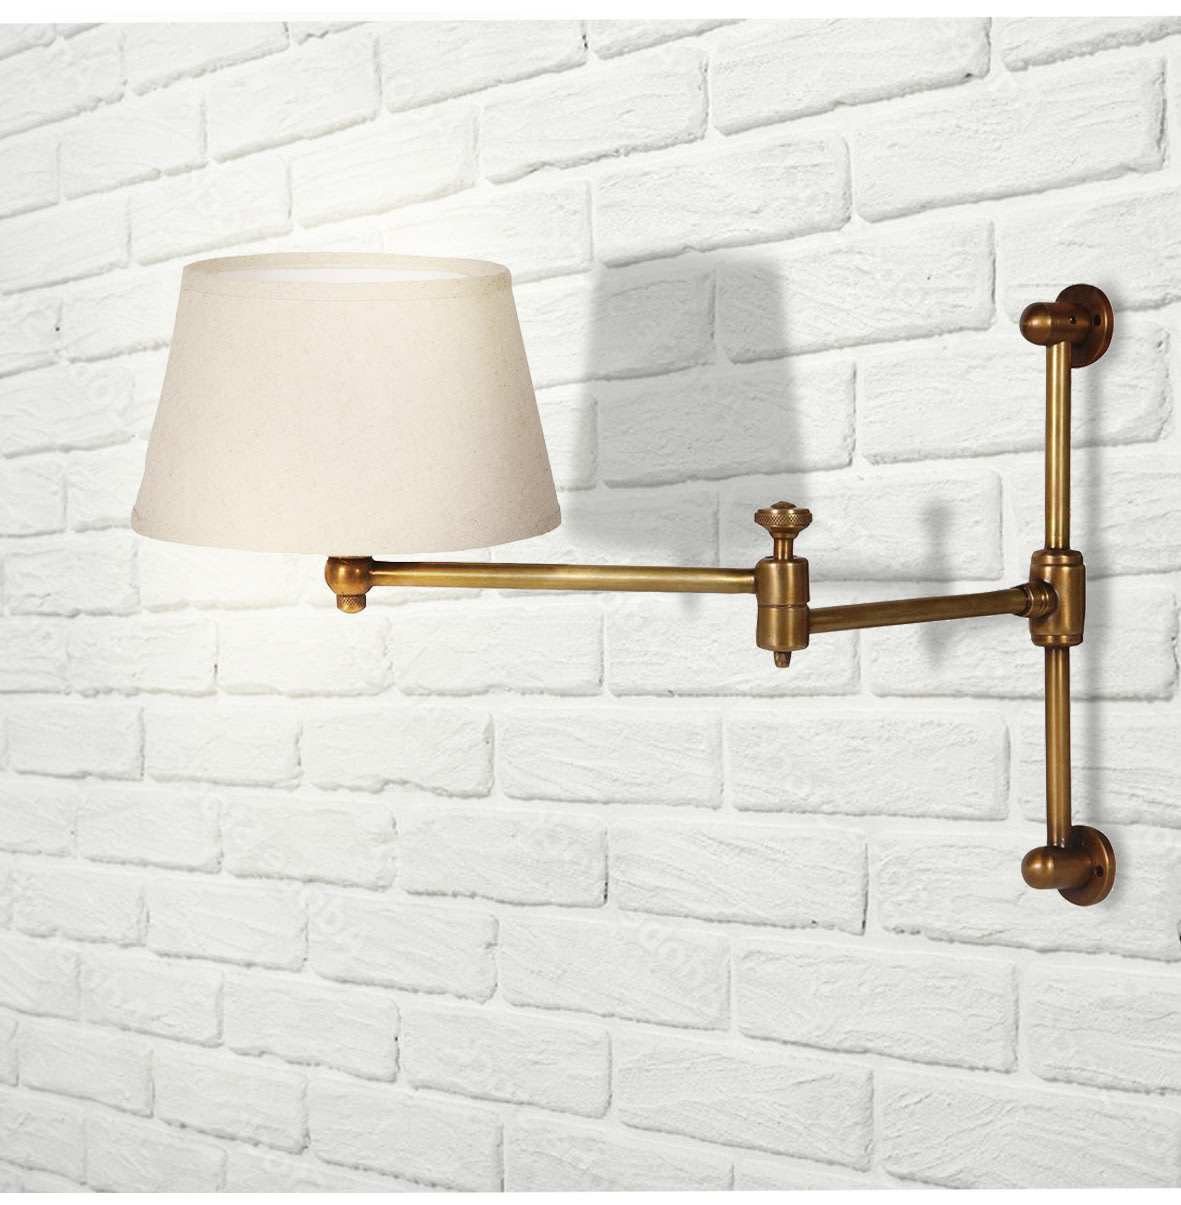 Adjustable Wall Lamp with Shade